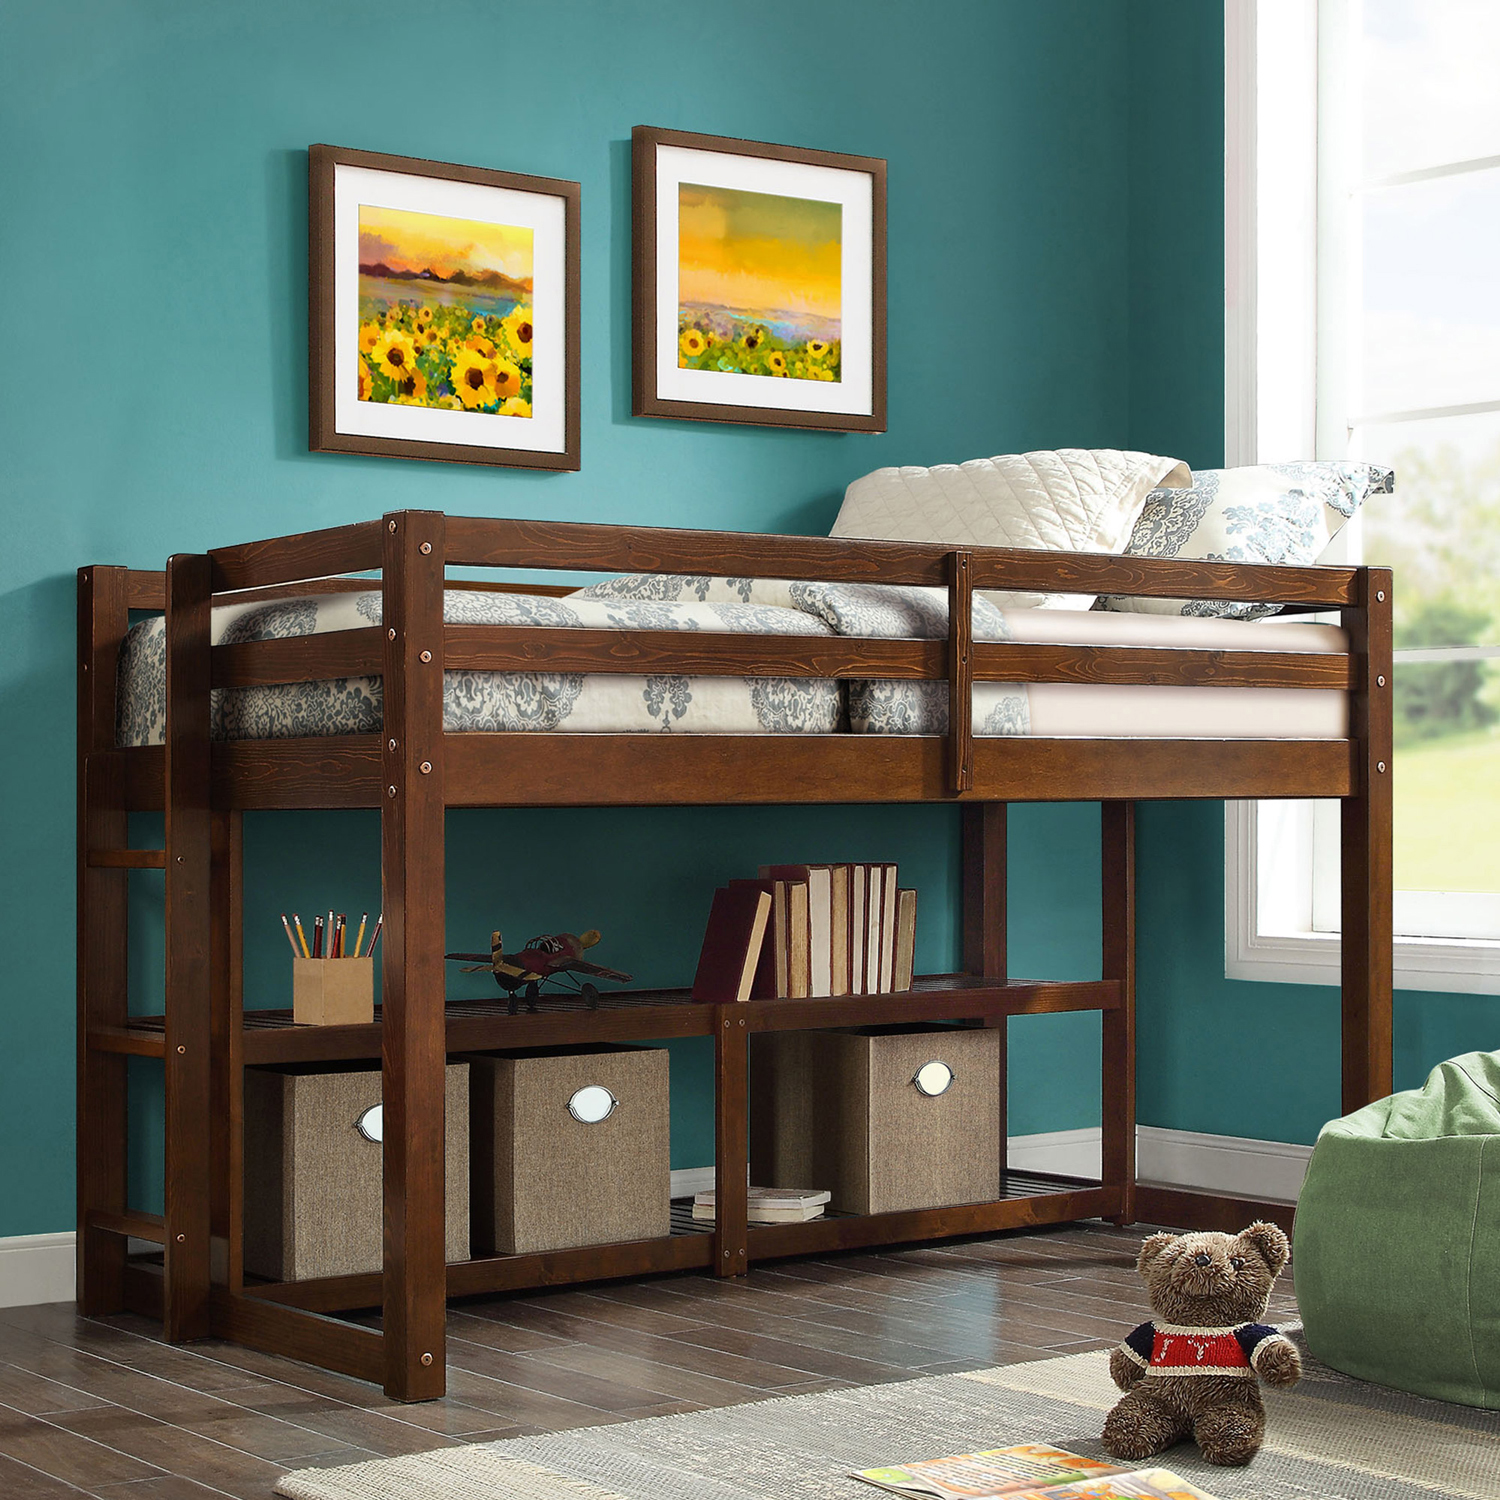 Better Homes and Gardens Loft Storage Bed with Spacious Storage Shelves